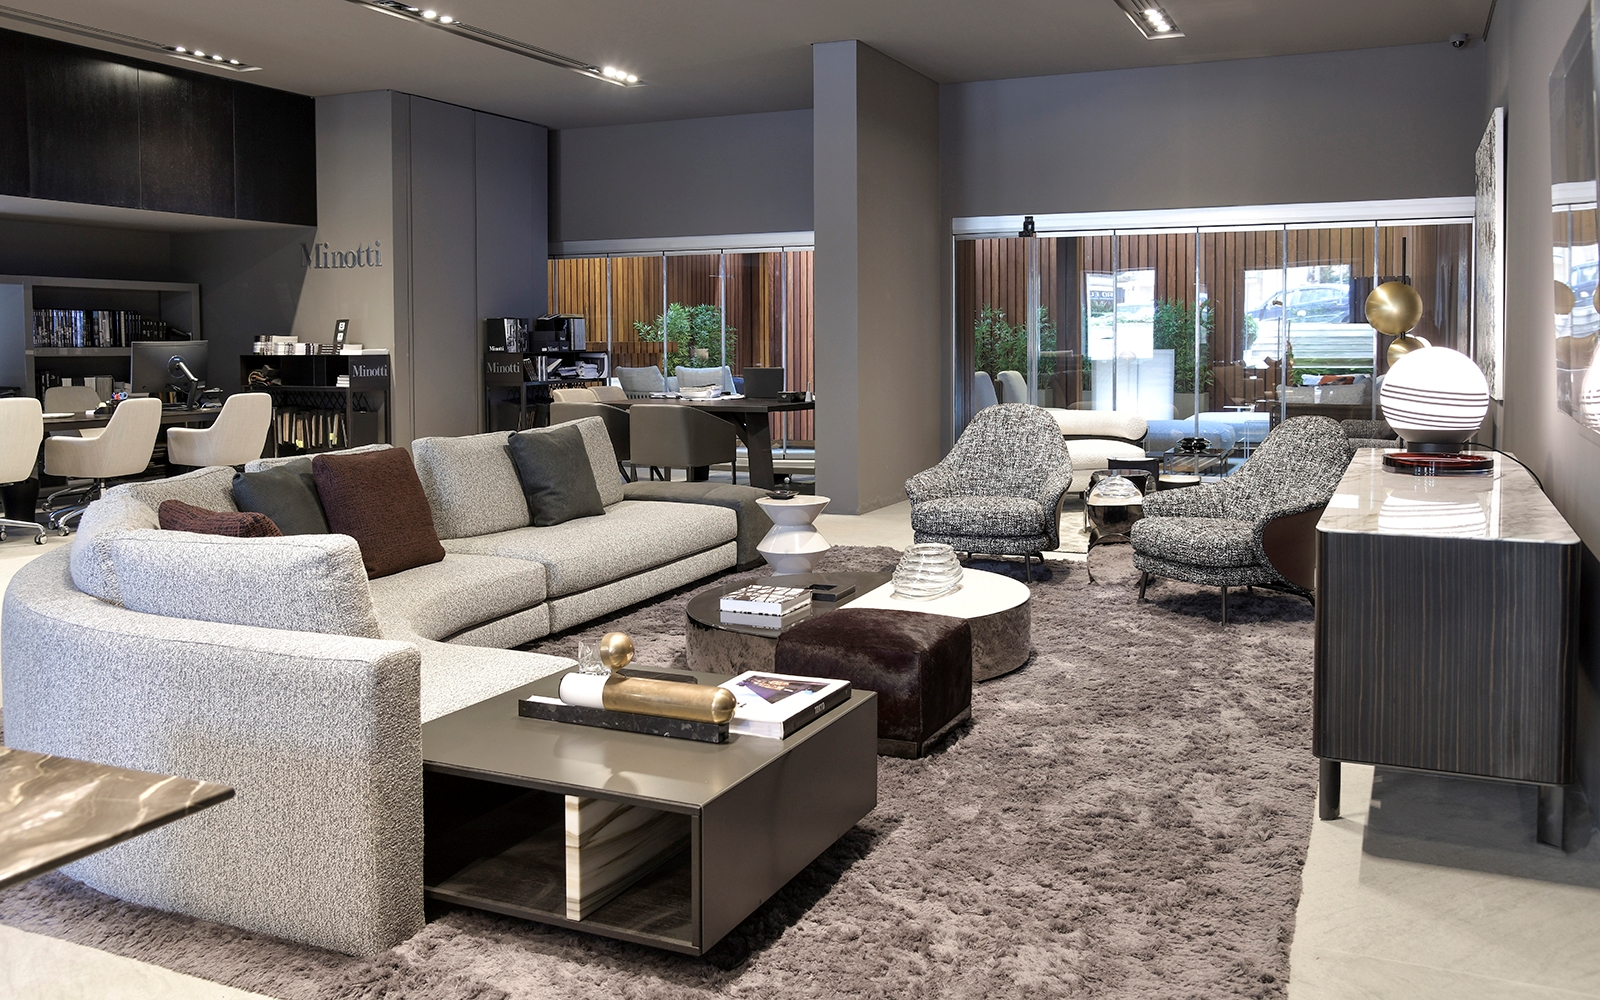 The Minotti Beirut flagship store reopens